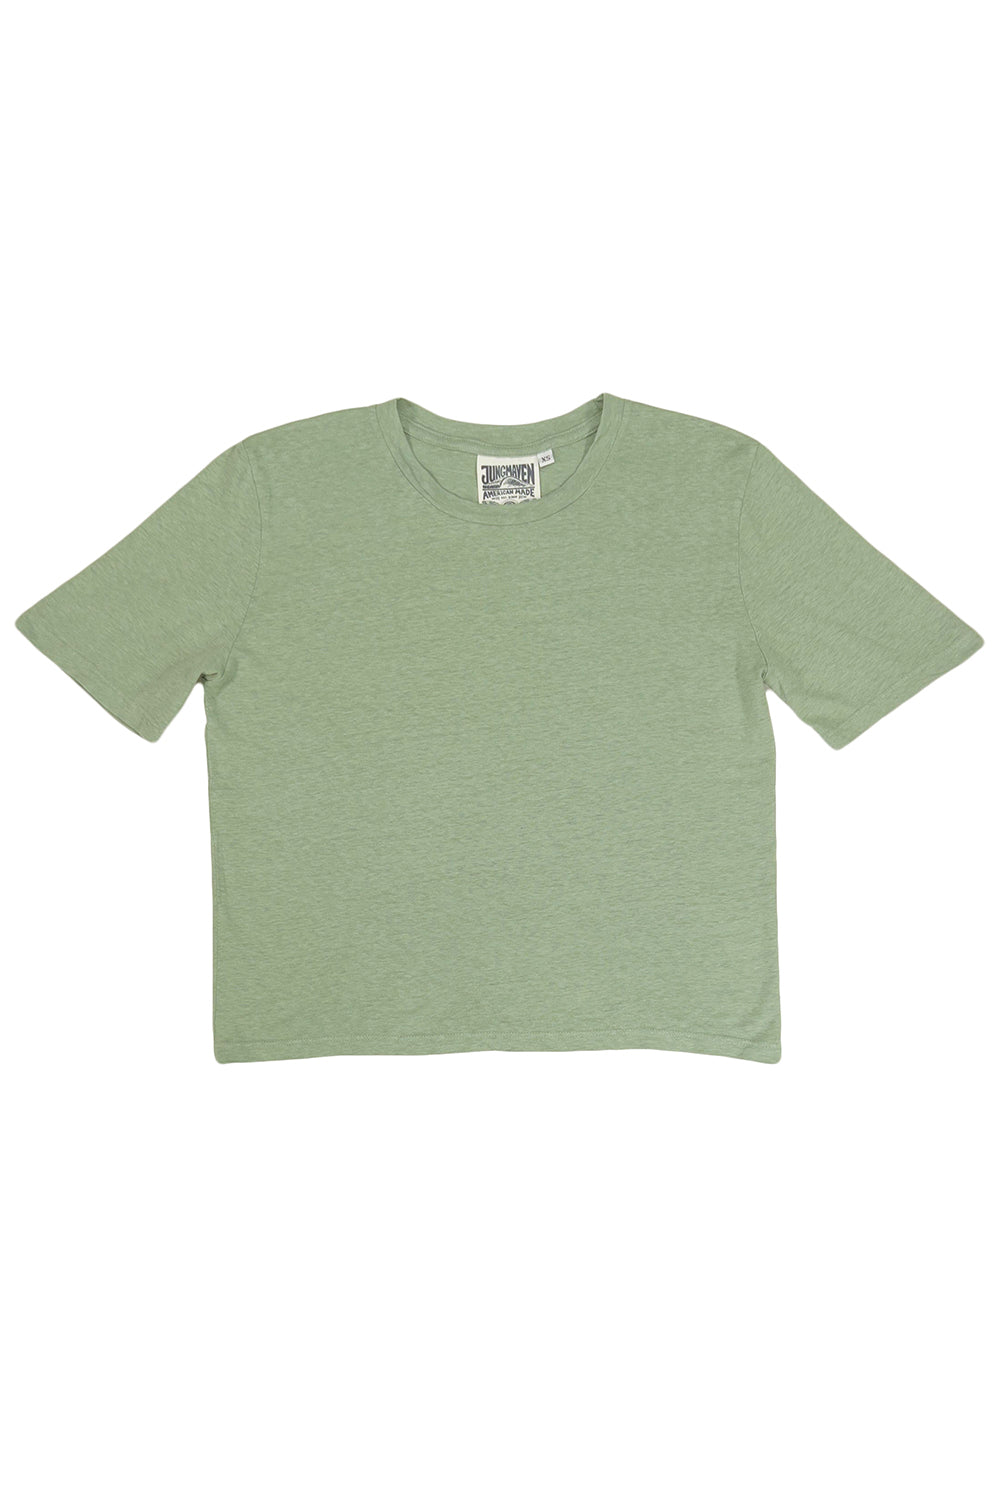 Silverlake Cropped Tee | Jungmaven Hemp Clothing & Accessories / Color: Sage Green